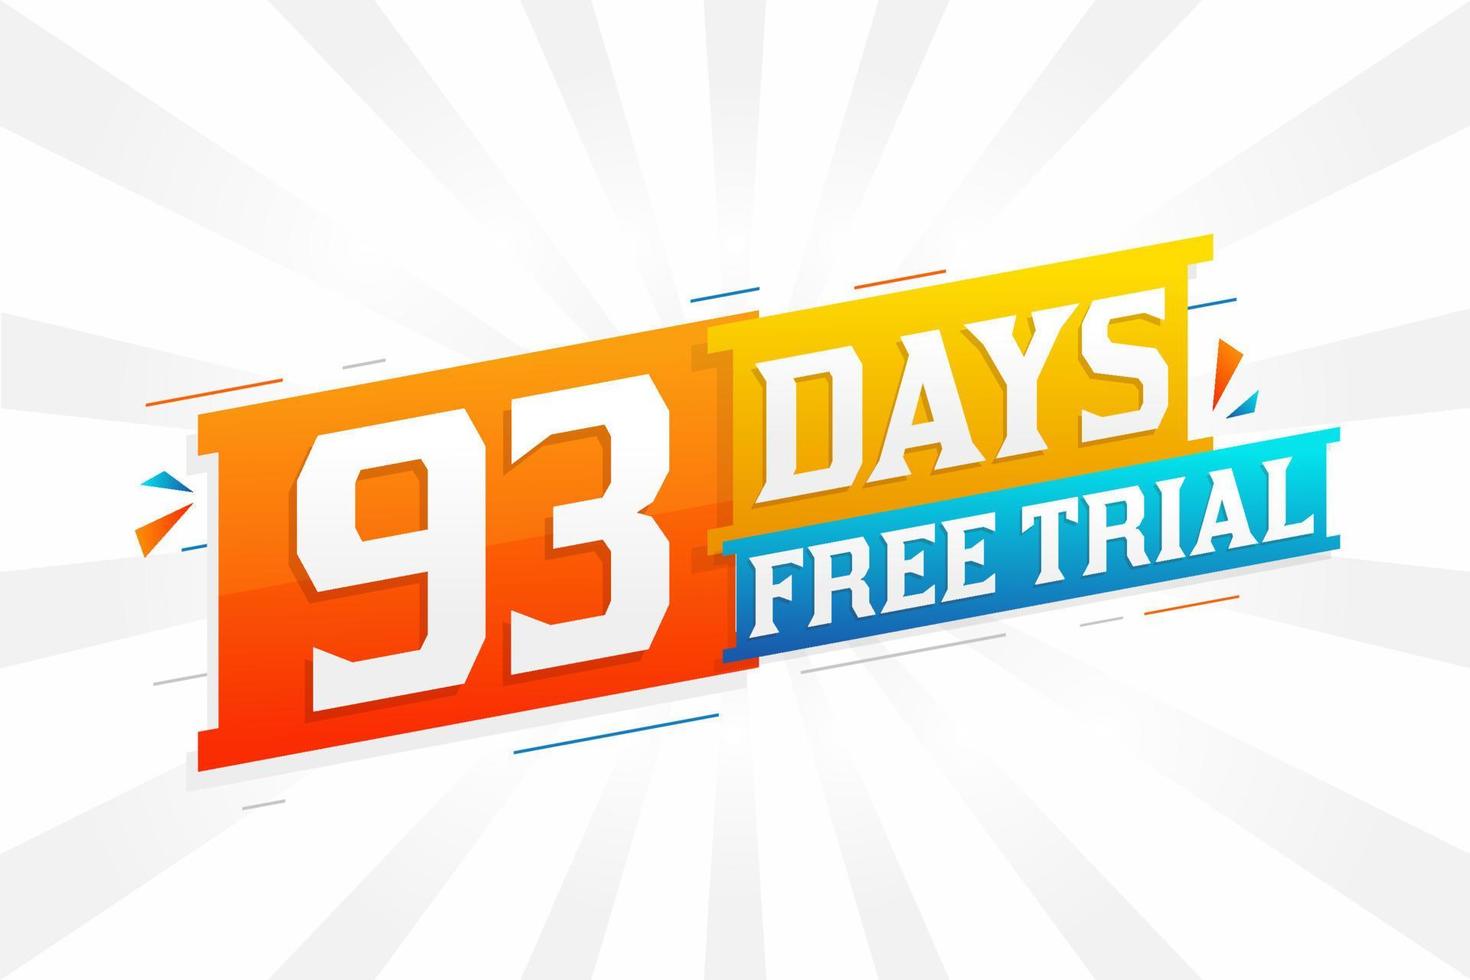 93 Days free Trial promotional bold text stock vector